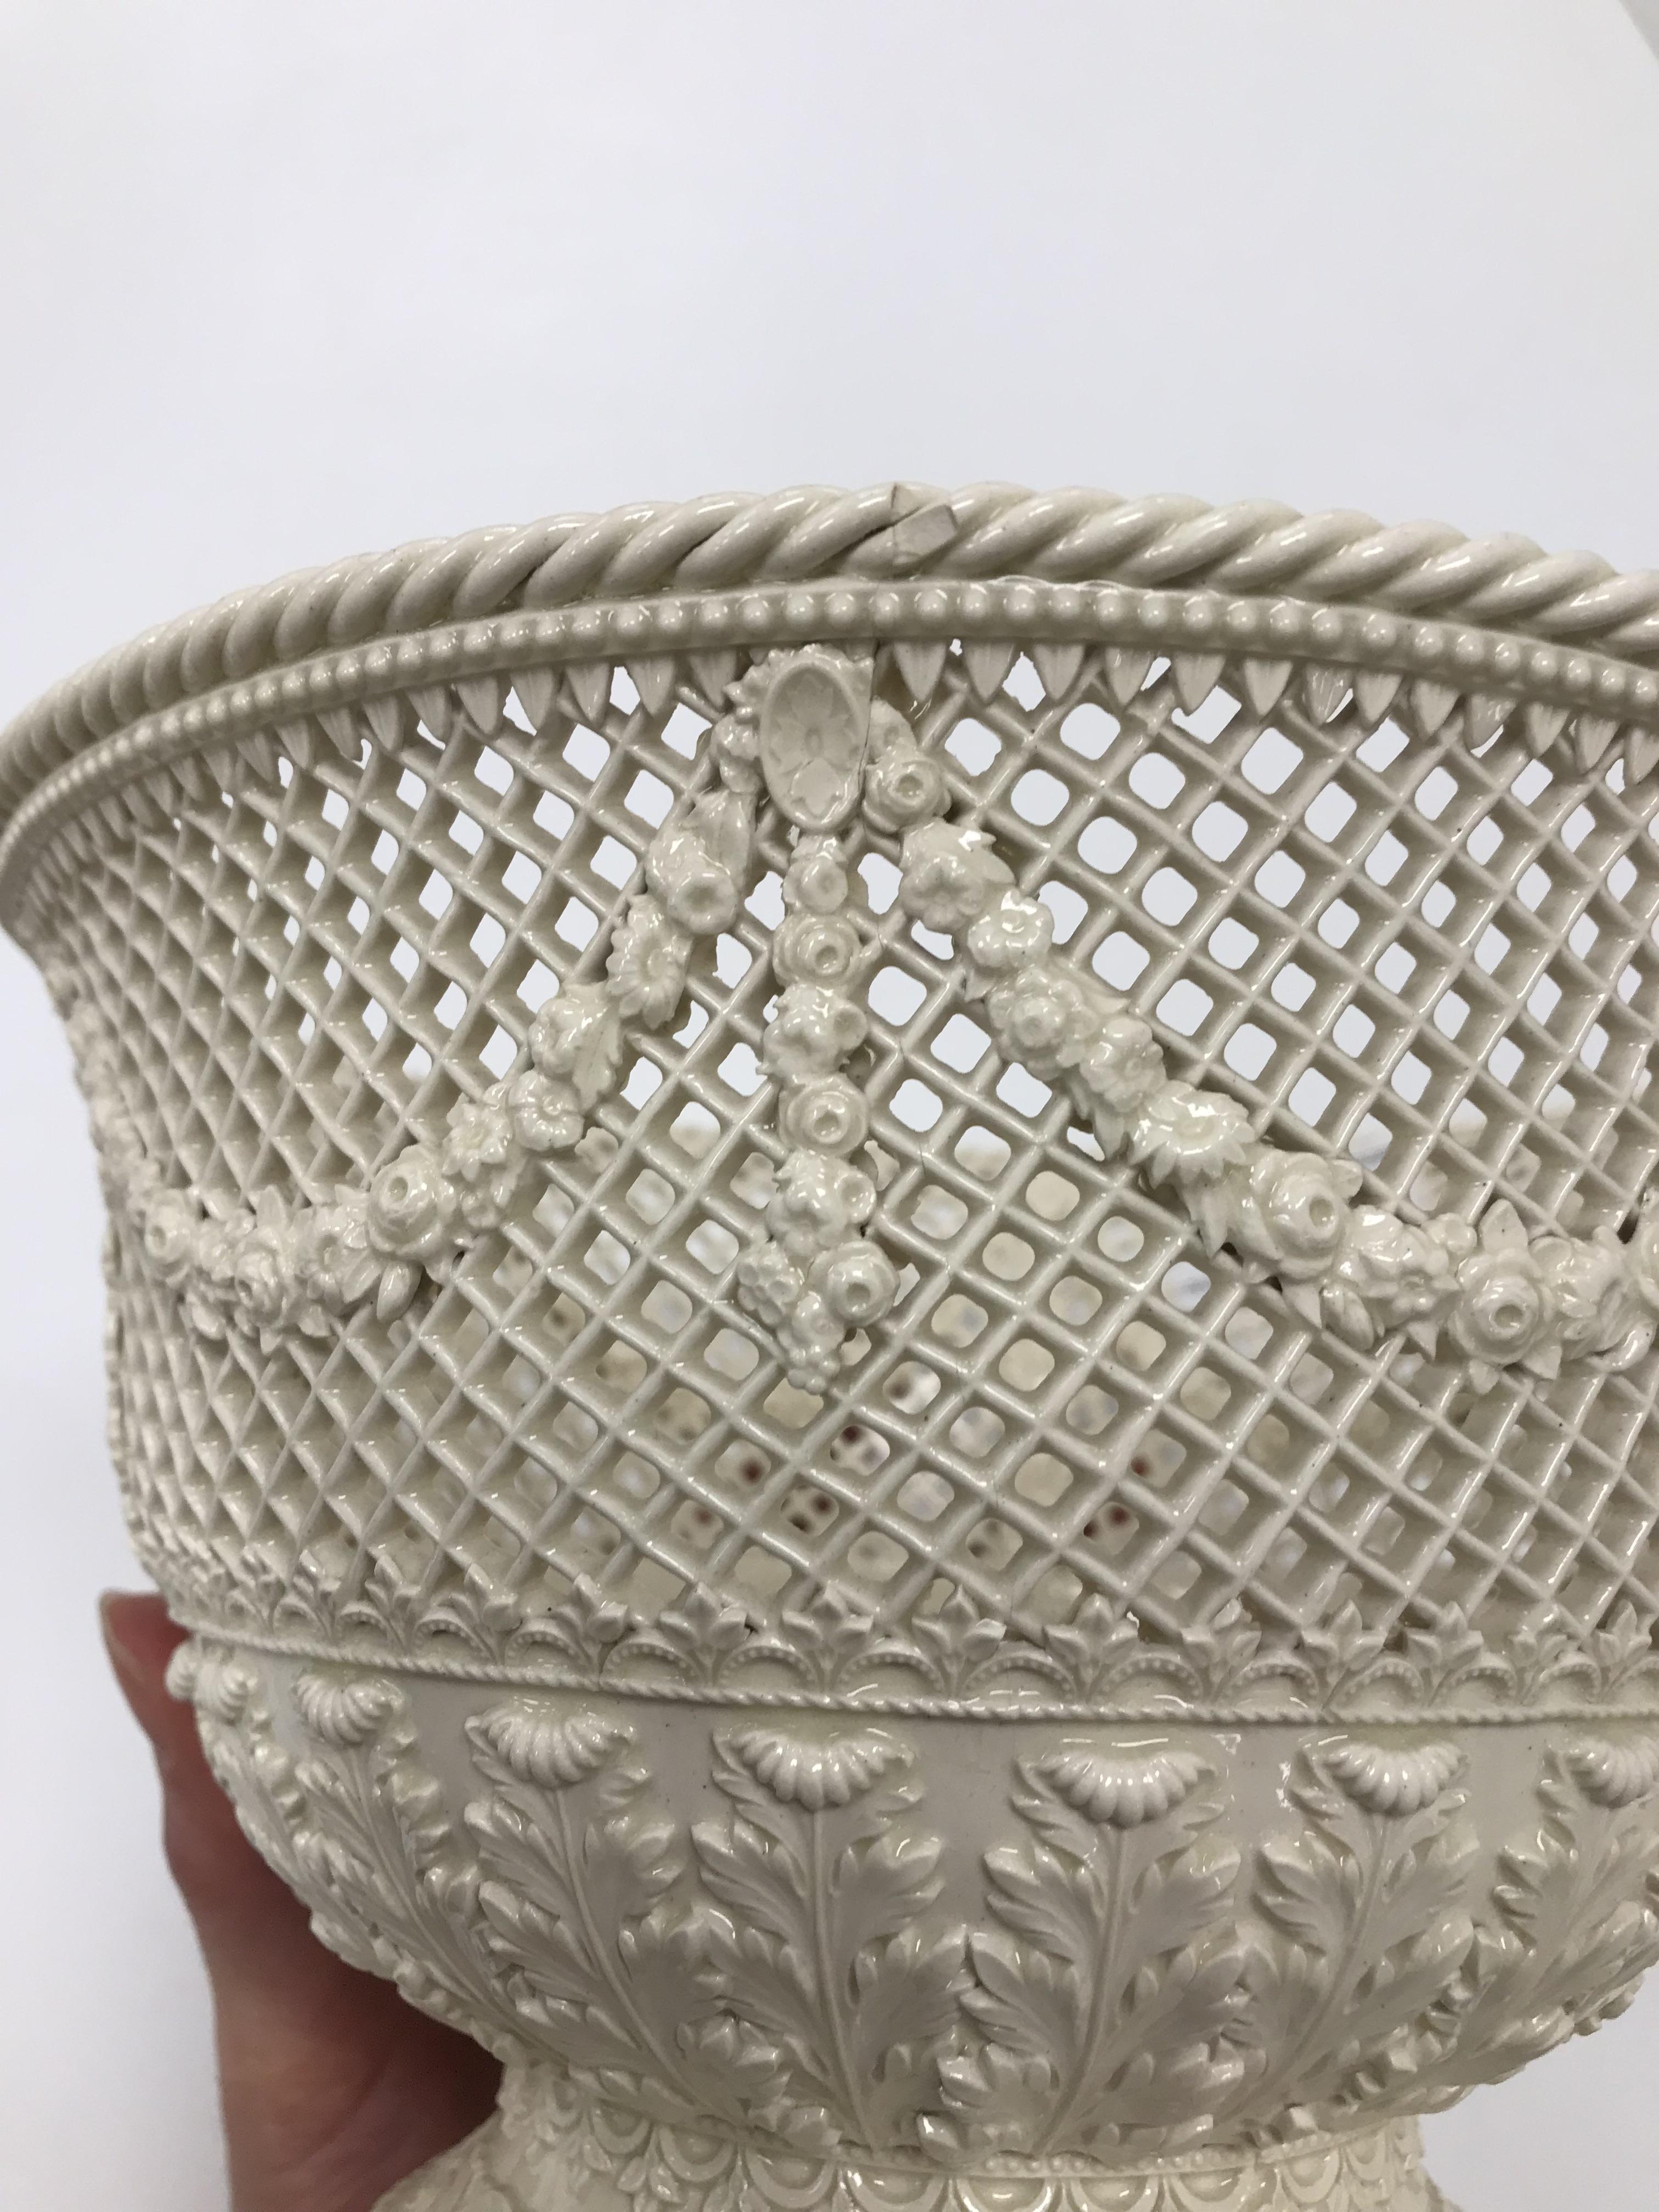 A 19th Century Wedgwood creamware reticulated bowl, - Image 5 of 7